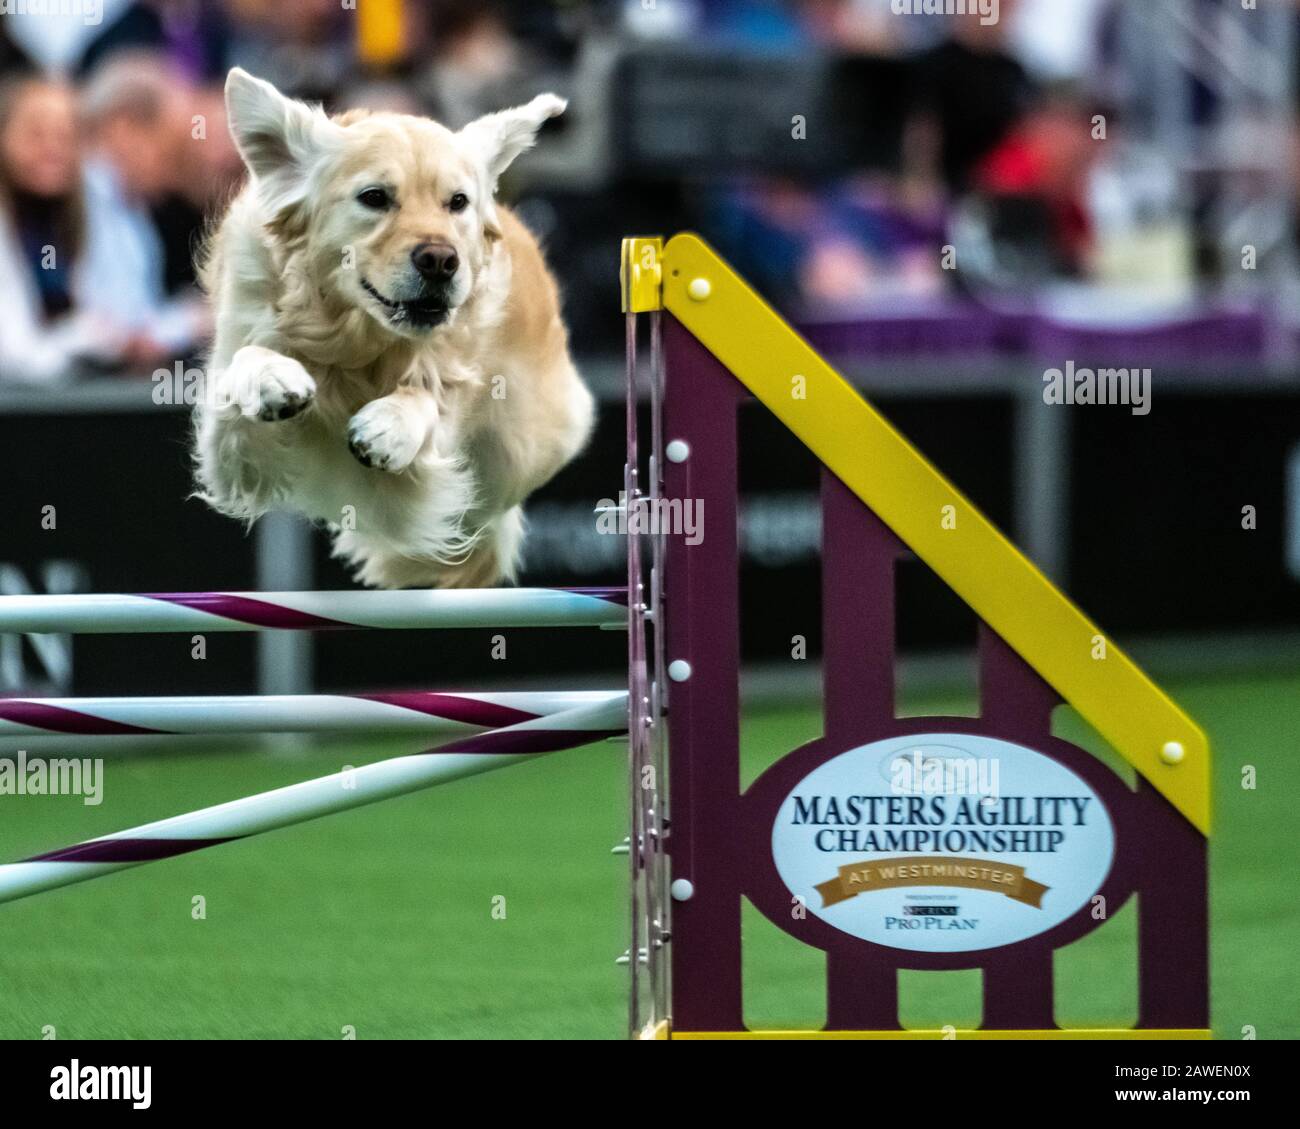 New York, USA. 8th Feb, 2020. Maui, a Golden Retriever, clears an obstacle during the qualifying round of The Westminster Kennel Club Dog show Masters Agility Championship in New York city. Credit: Enrique Shore/Alamy Live News Stock Photo